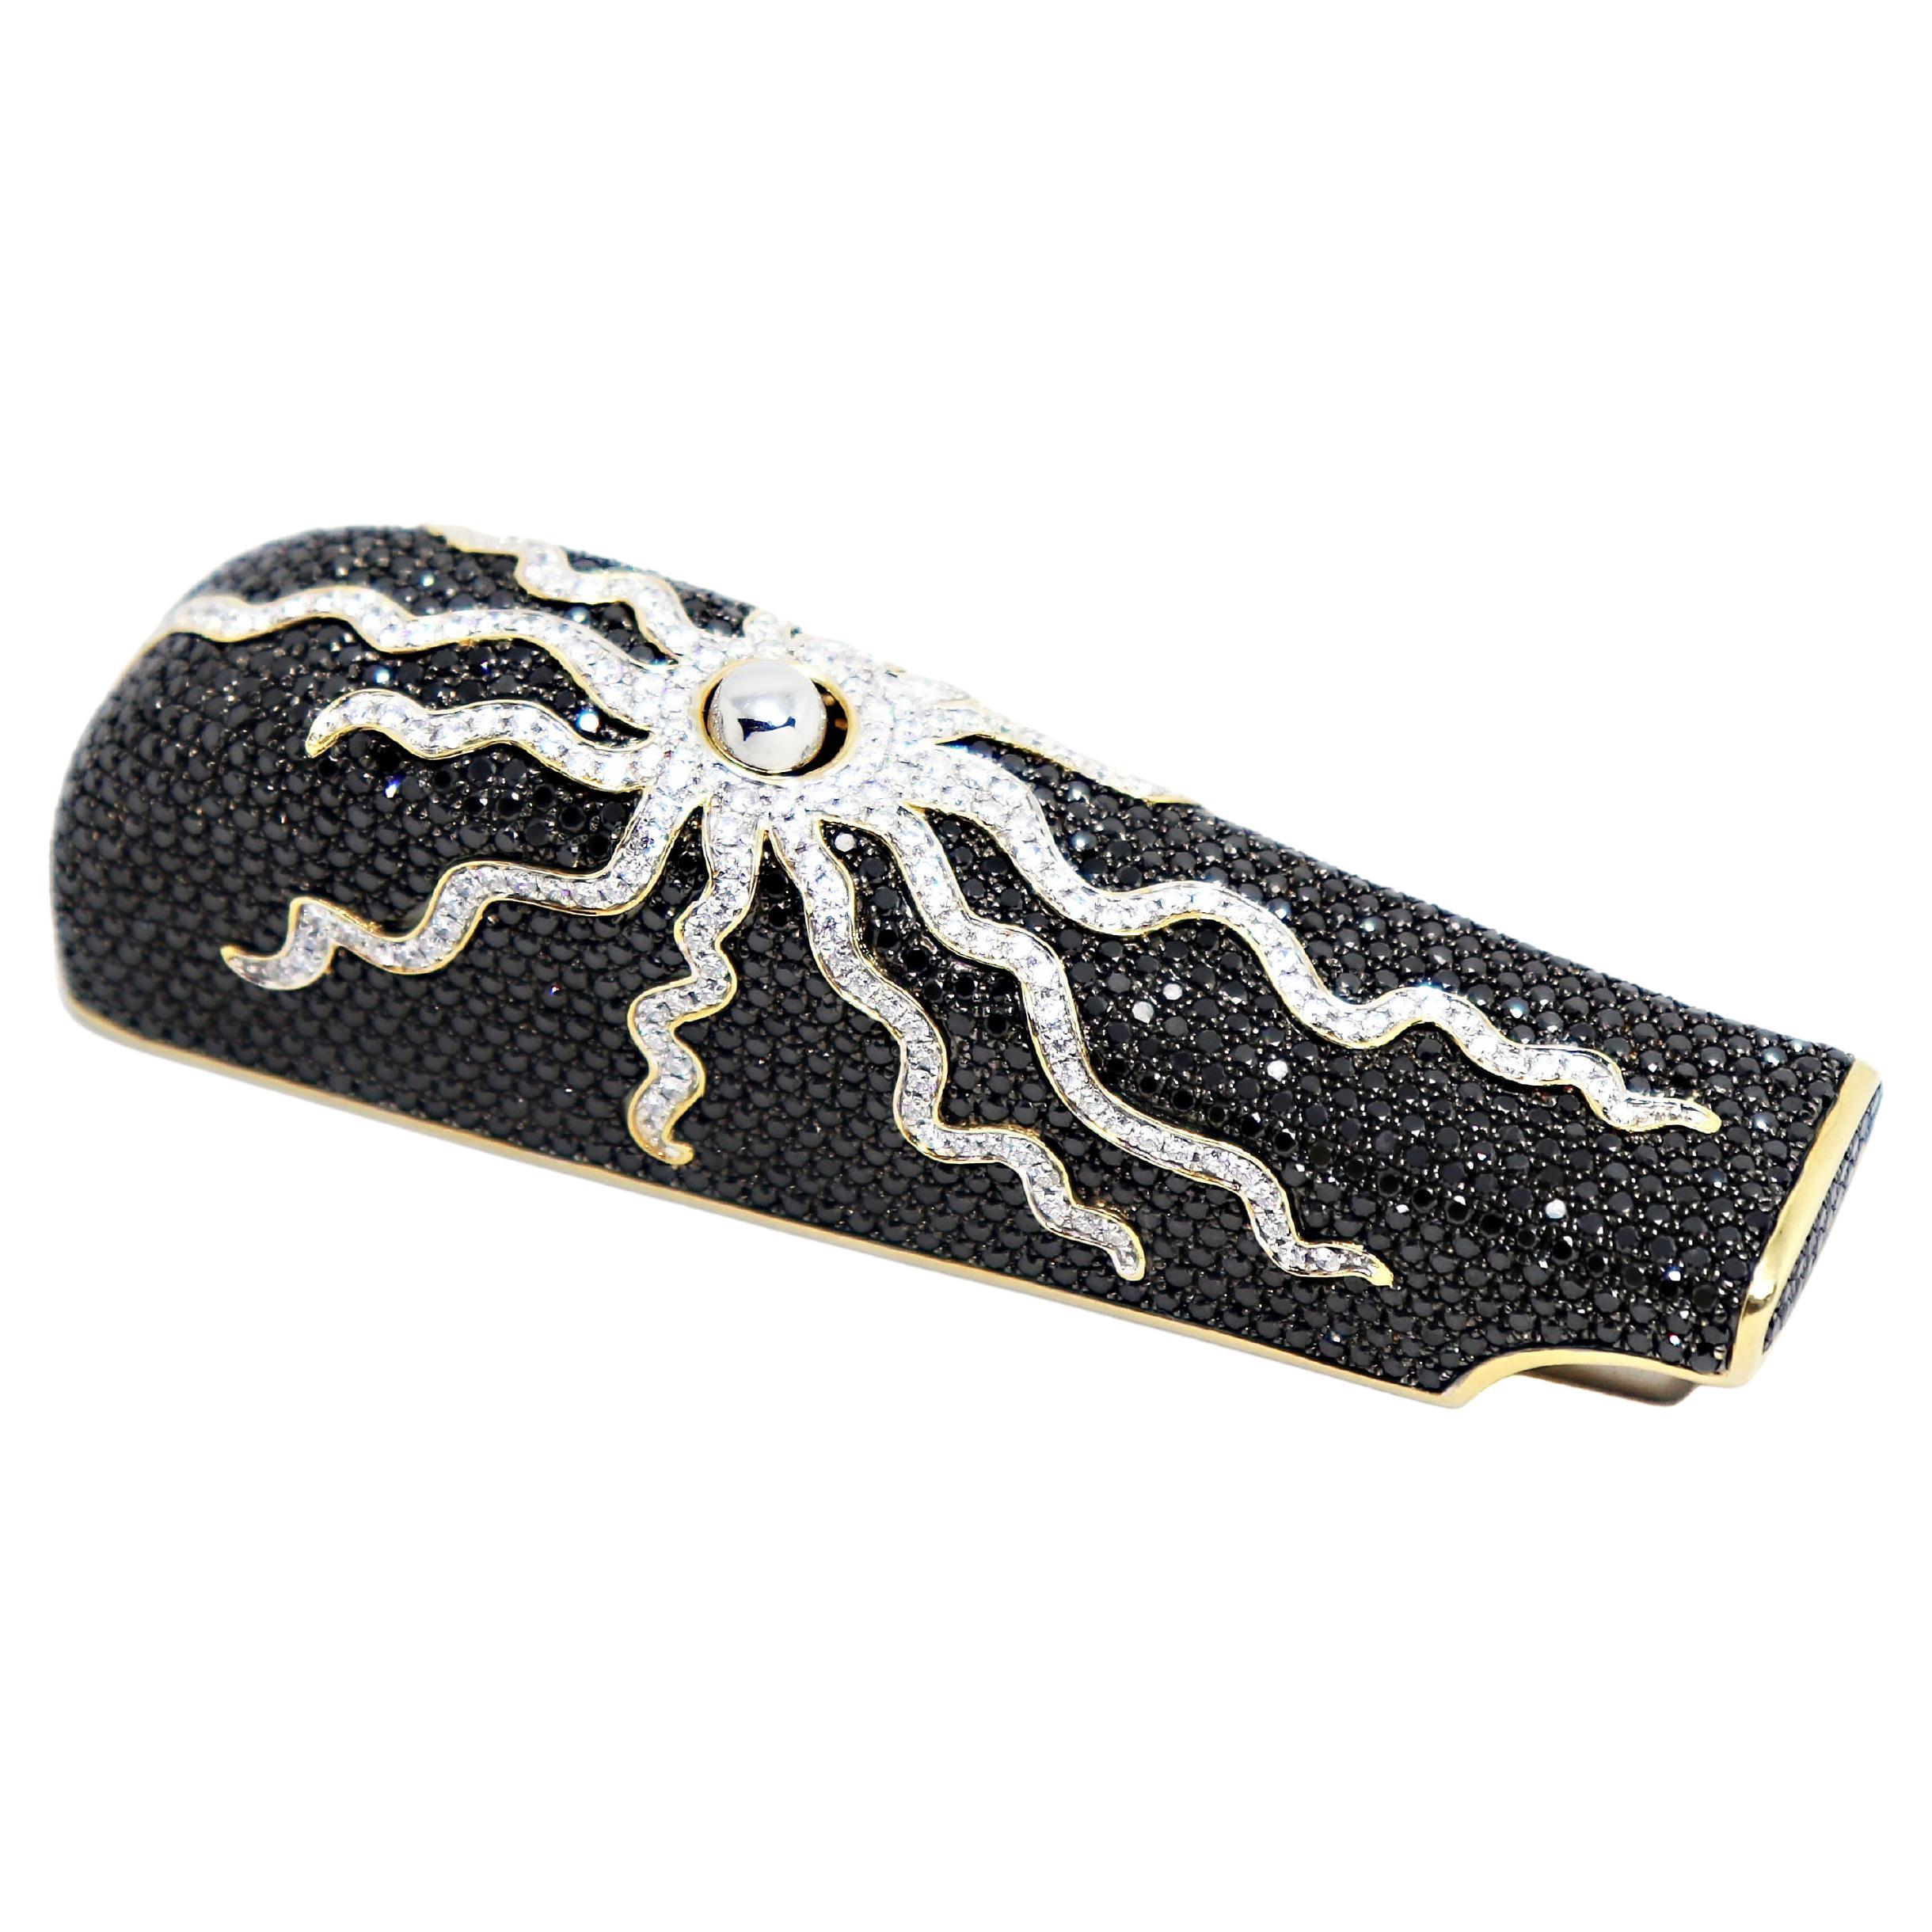 This limited edition accessory is designed to keep your handbag safe, clean and close to you! Made by TACH, this incredible handbag holder is beautifully handcrafted in 18 carat gold (hallmarked), and inlaid with approximately 16.00 carats of fine